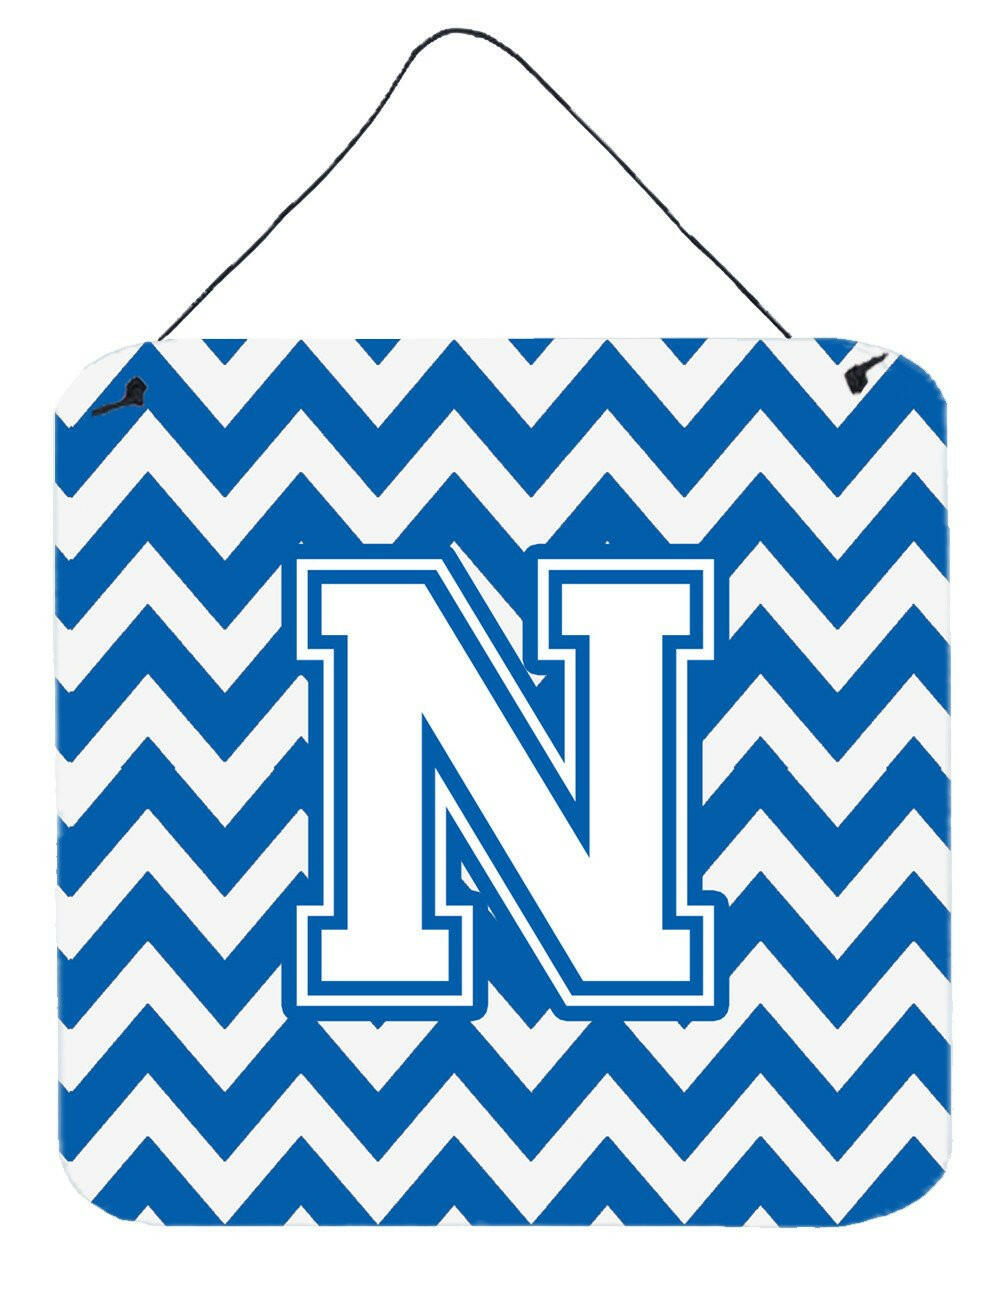 Letter N Chevron Blue and White Wall or Door Hanging Prints CJ1045-NDS66 by Caroline's Treasures